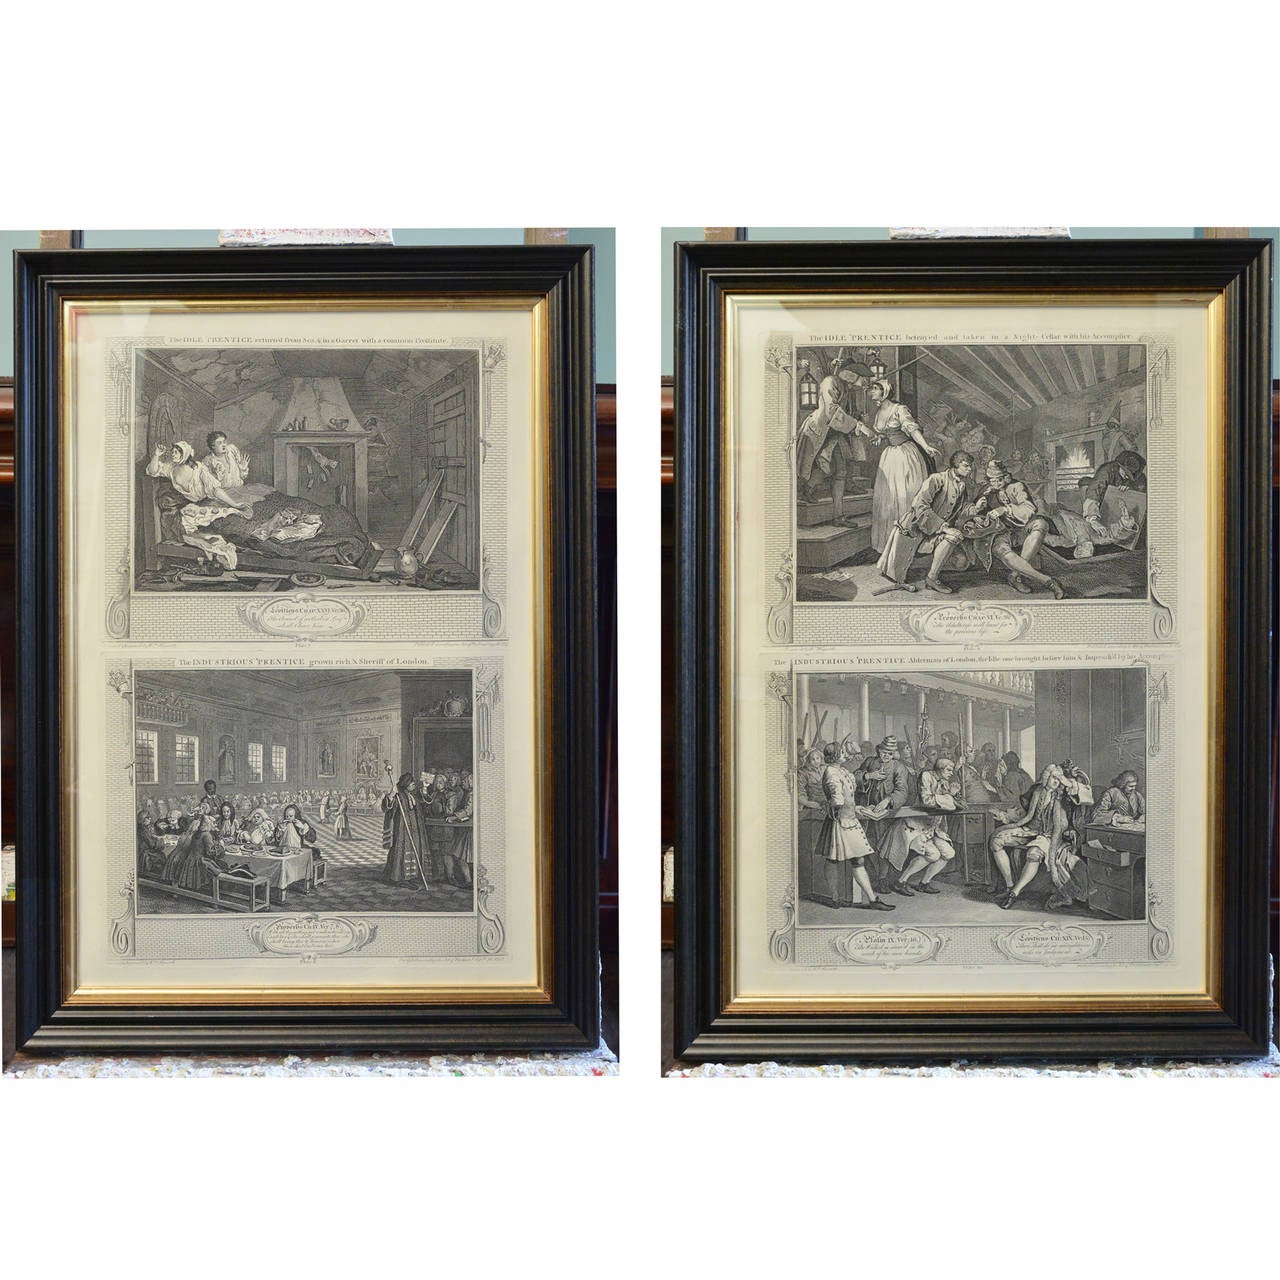 British Industry and Idleness Prints by William Hogarth